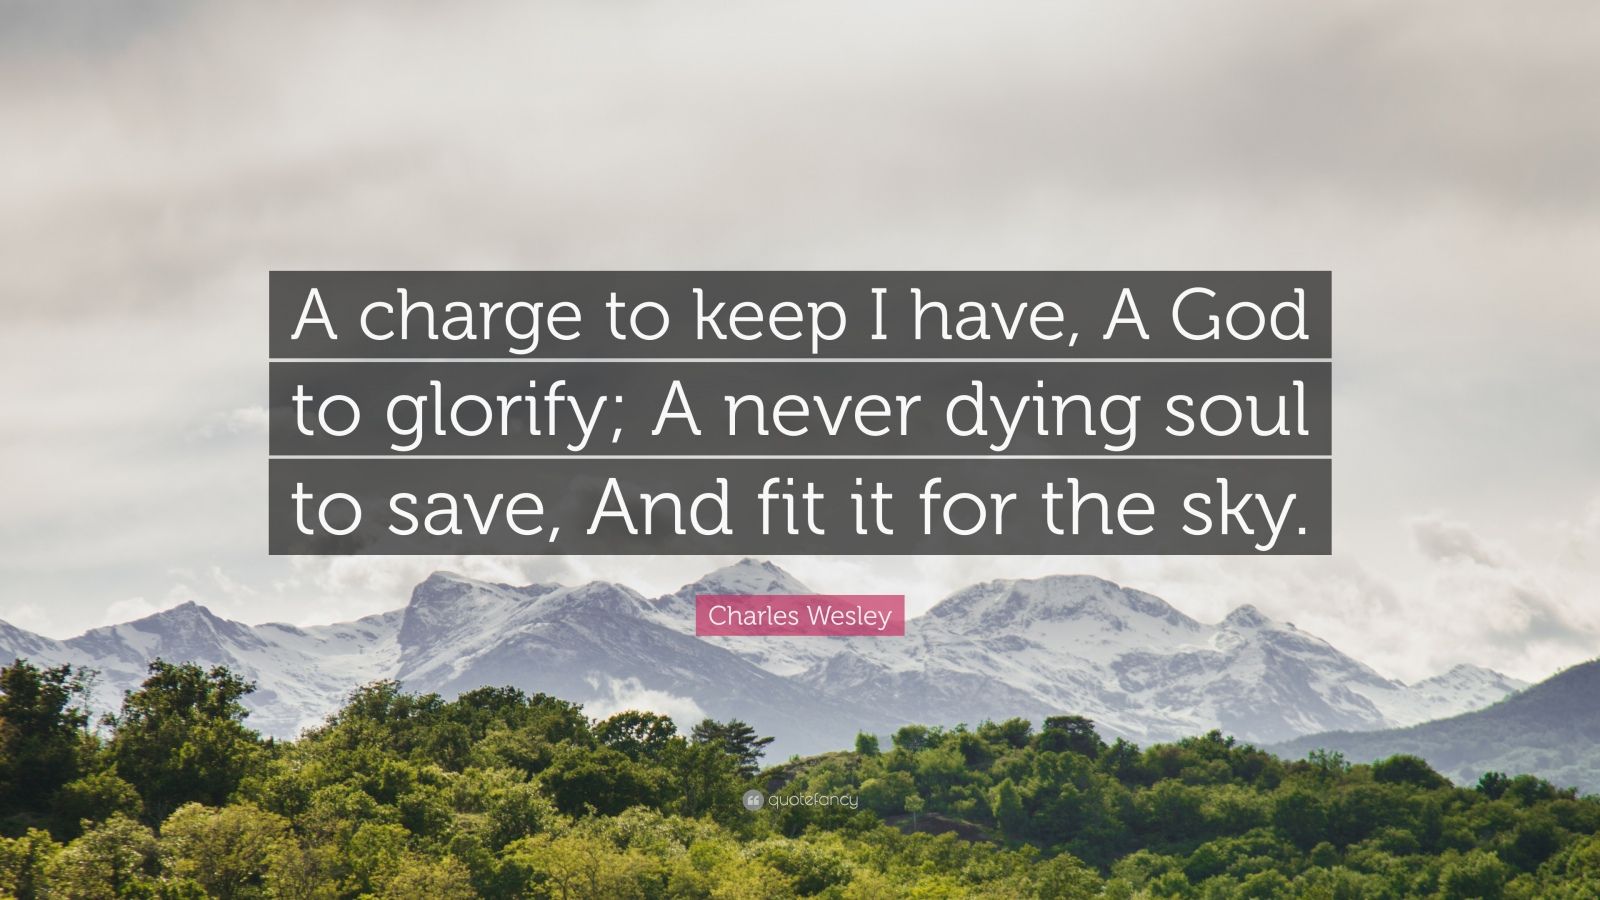 Charles Wesley Quote: “A charge to keep I have, A God to glorify; A never  dying soul to save, And fit it for the sky.”